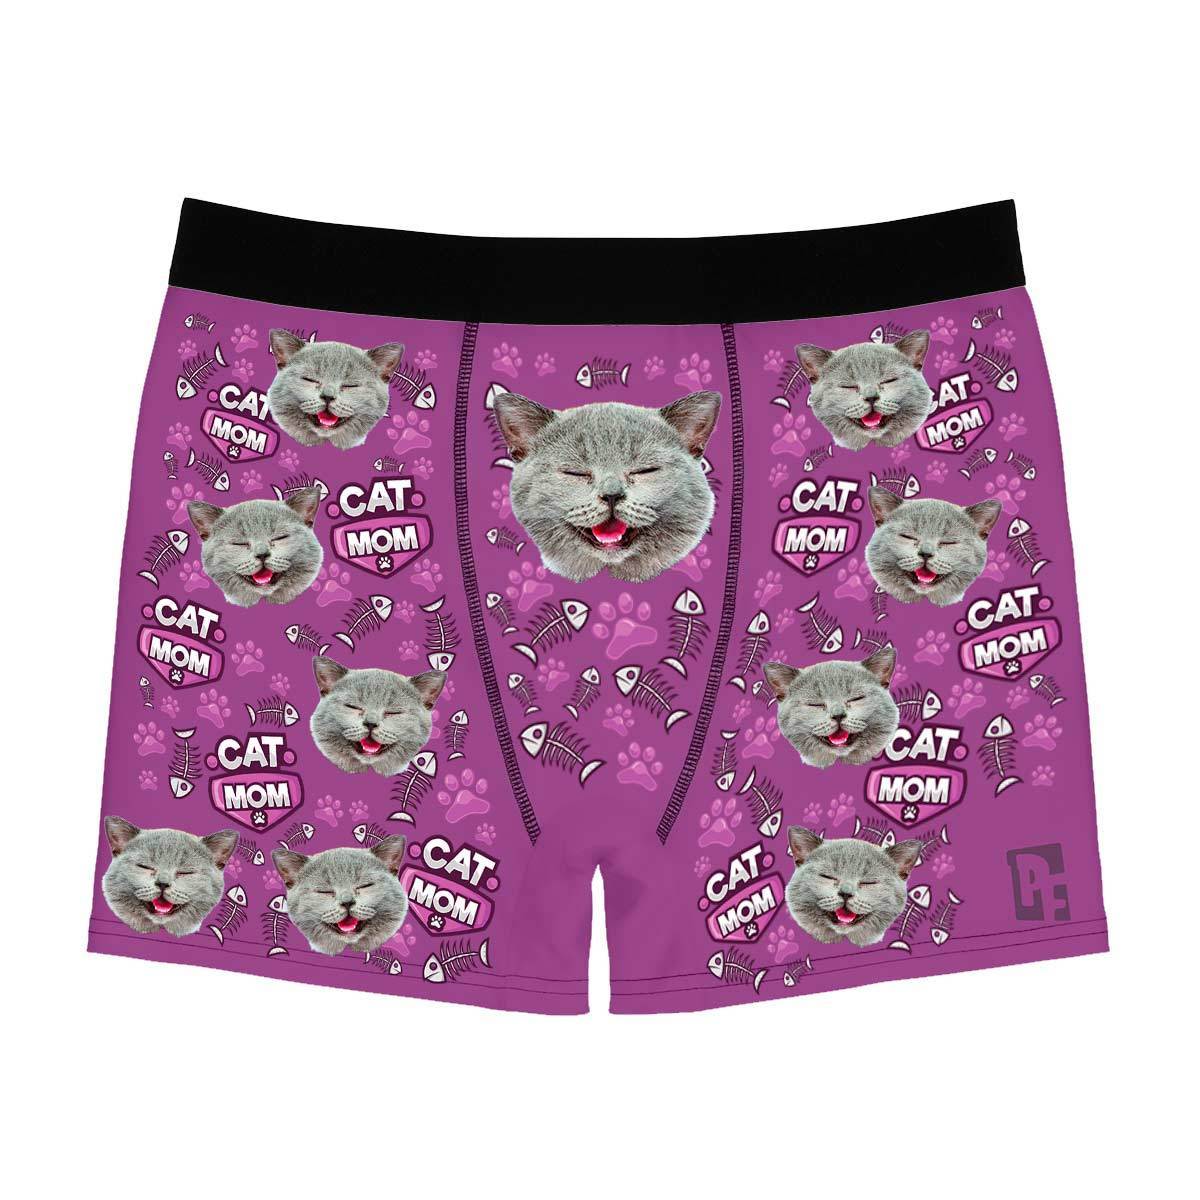 Purple Cat Mom men's boxer briefs personalized with photo printed on them